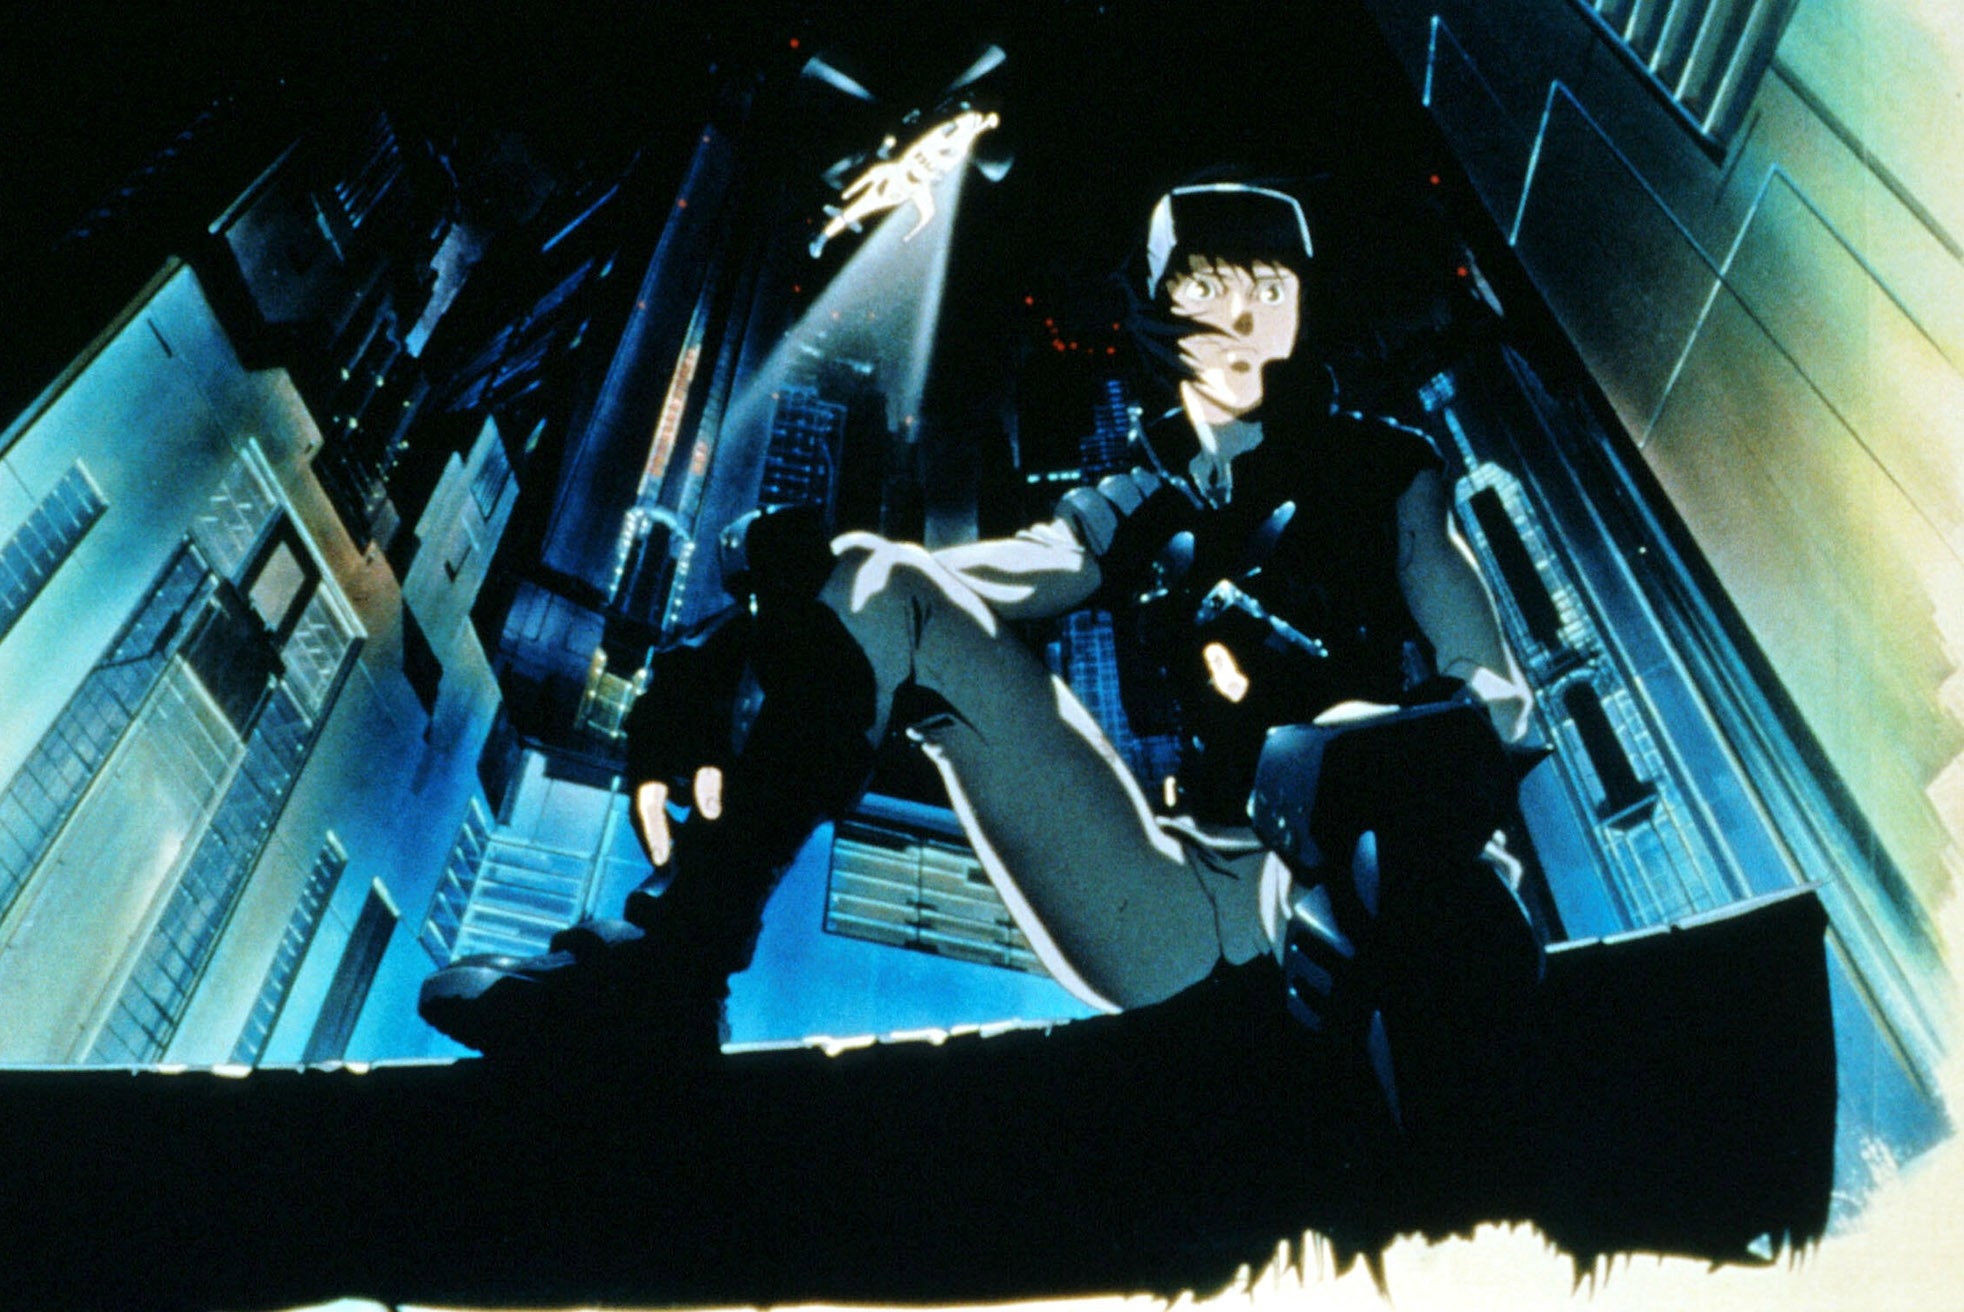 Image du film Ghost in the Shell 6701ac40-97ea-46ae-af80-25f72e03cdfc